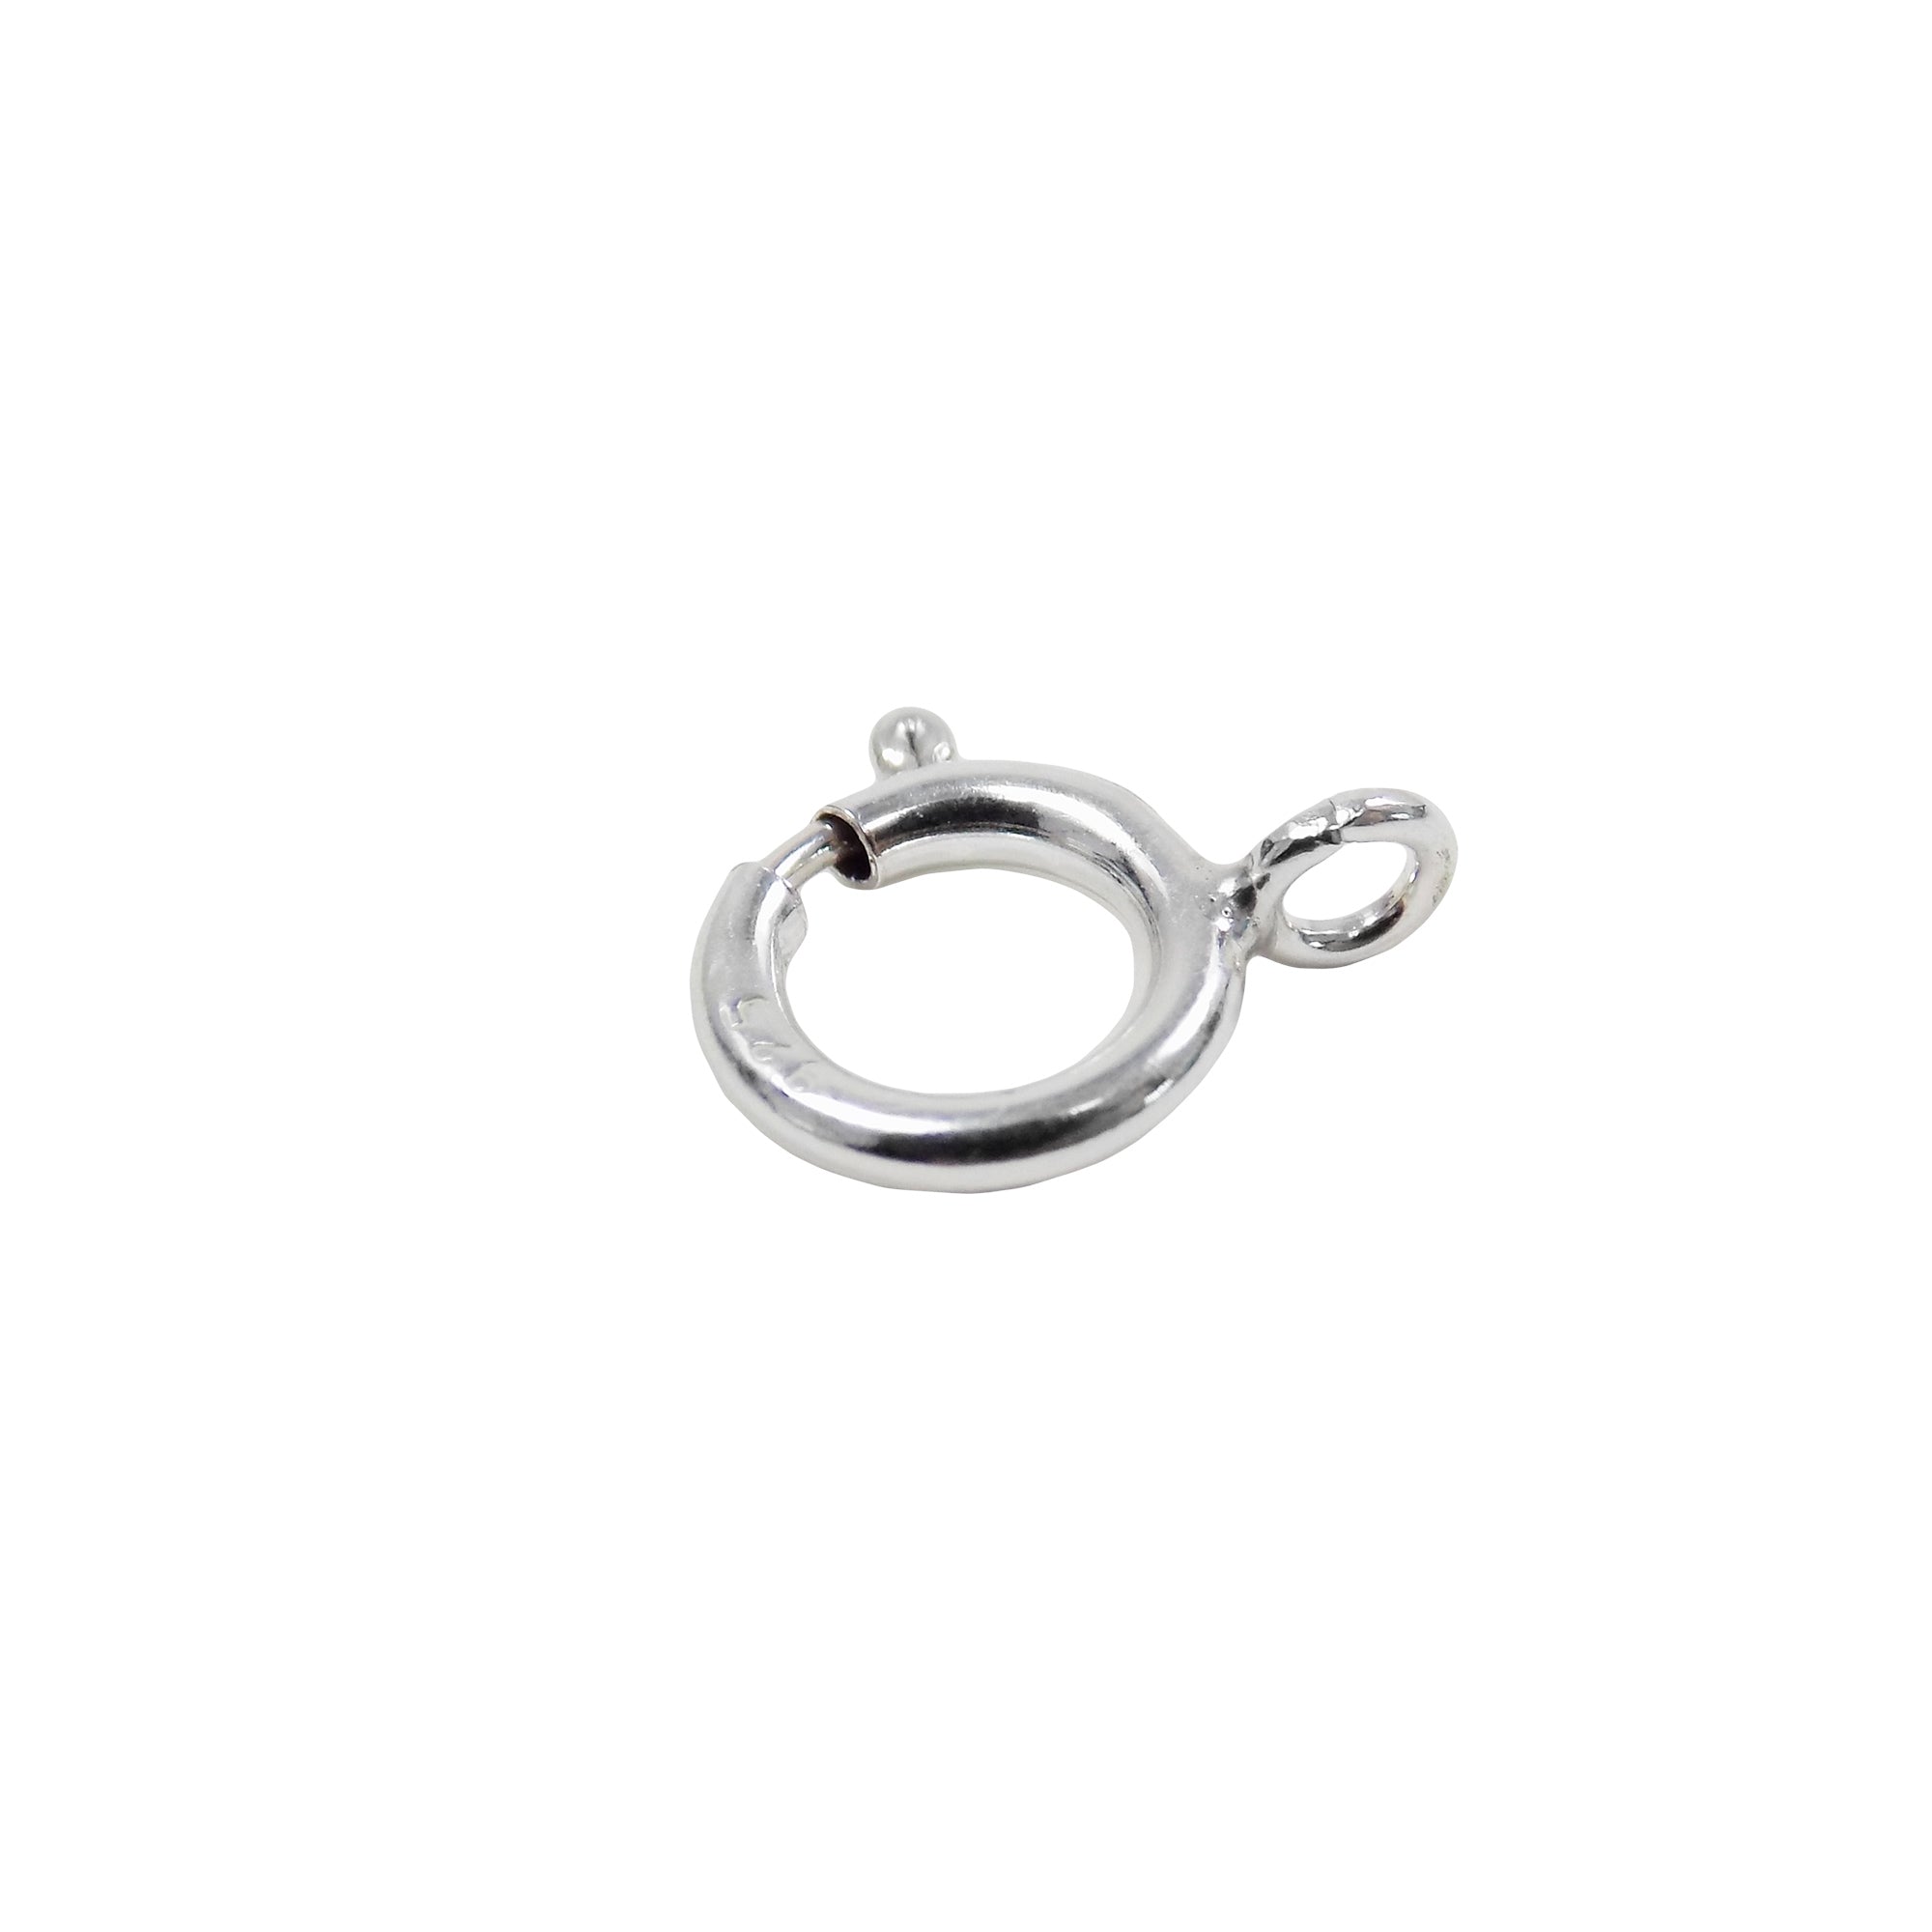 necklace spring ring clasp